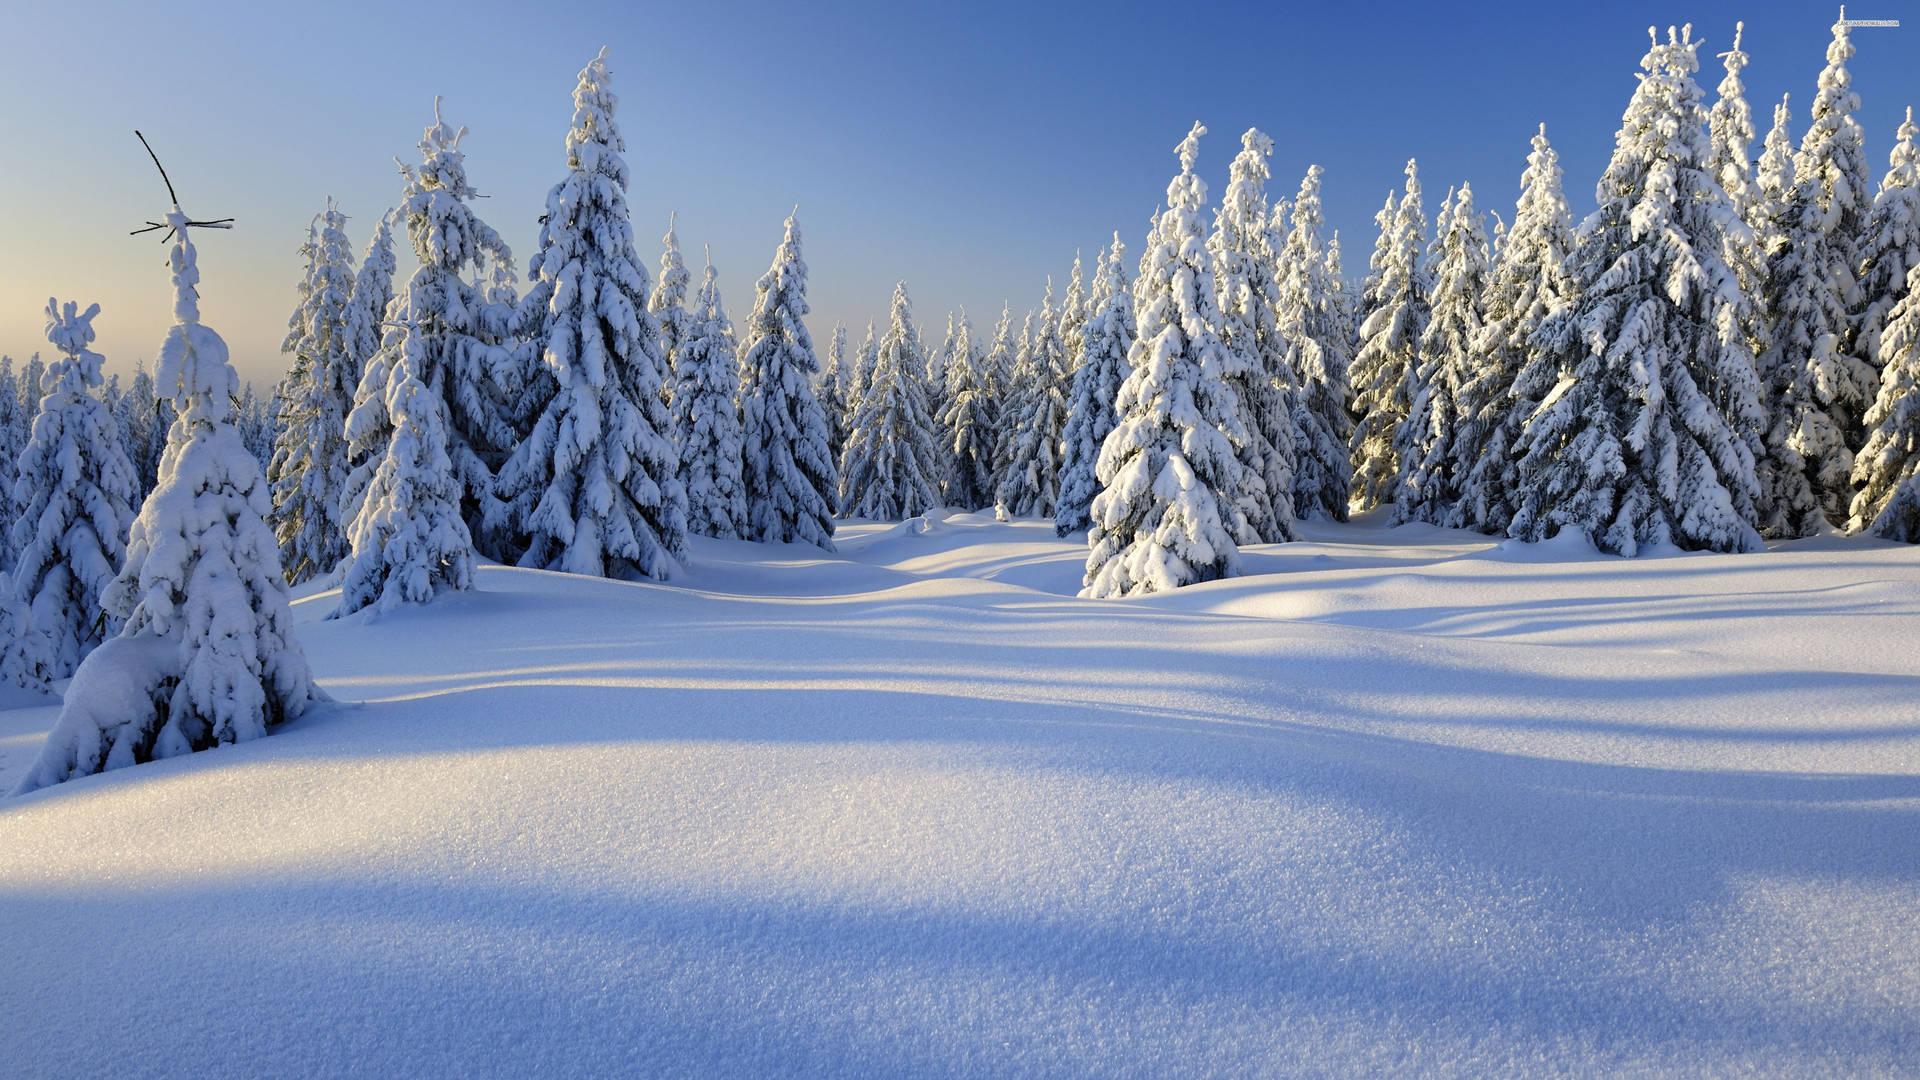 "Take in the amazing view of winter's beauty" Wallpaper